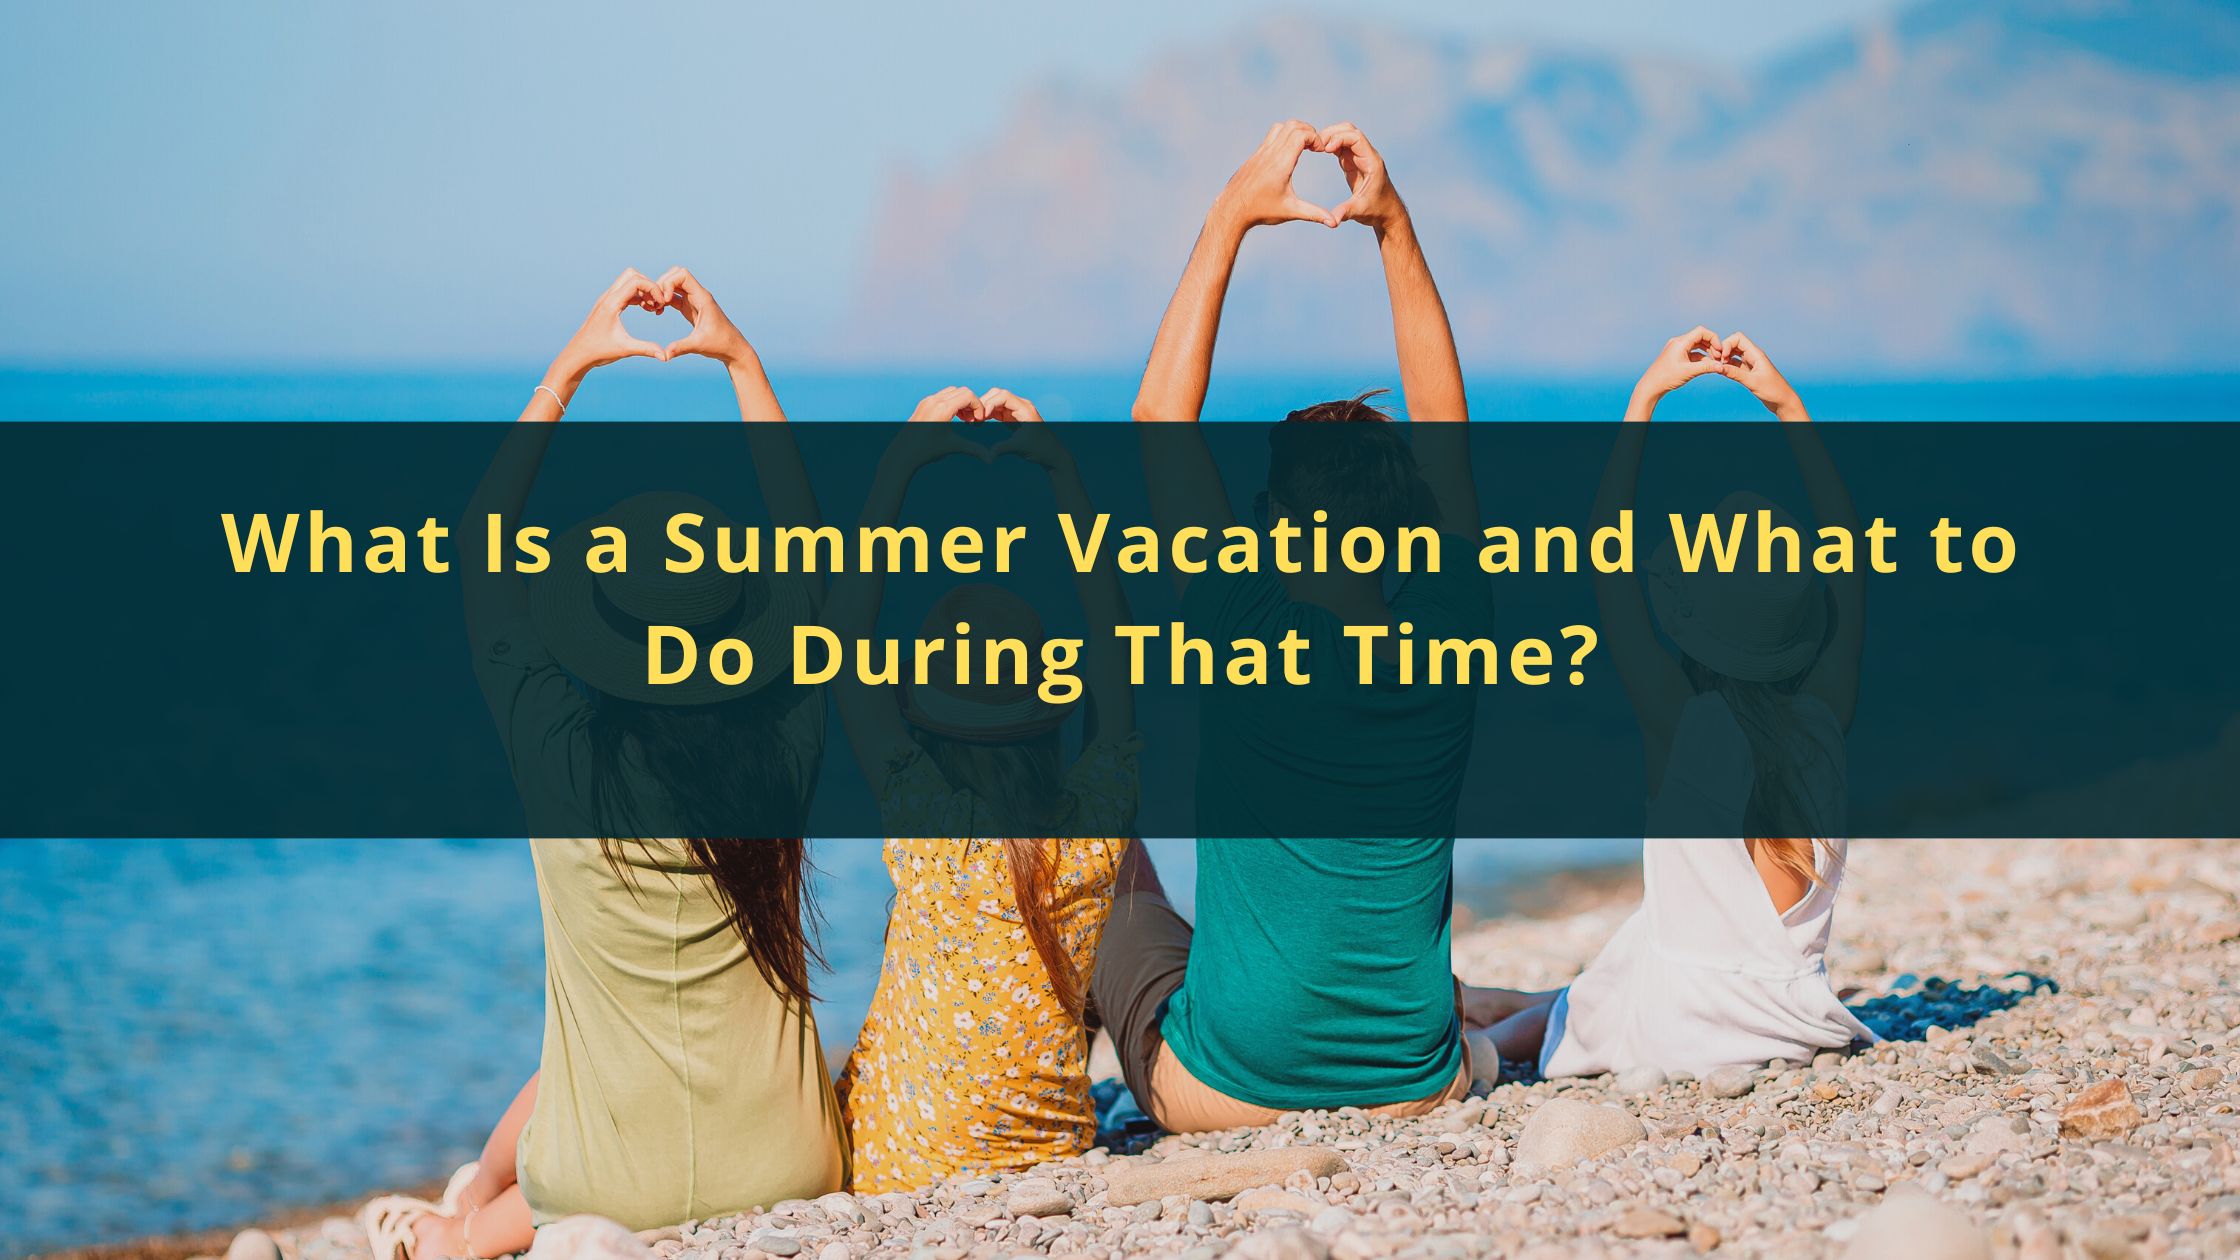 What Is a Summer Vacation and What to Do During That Time?